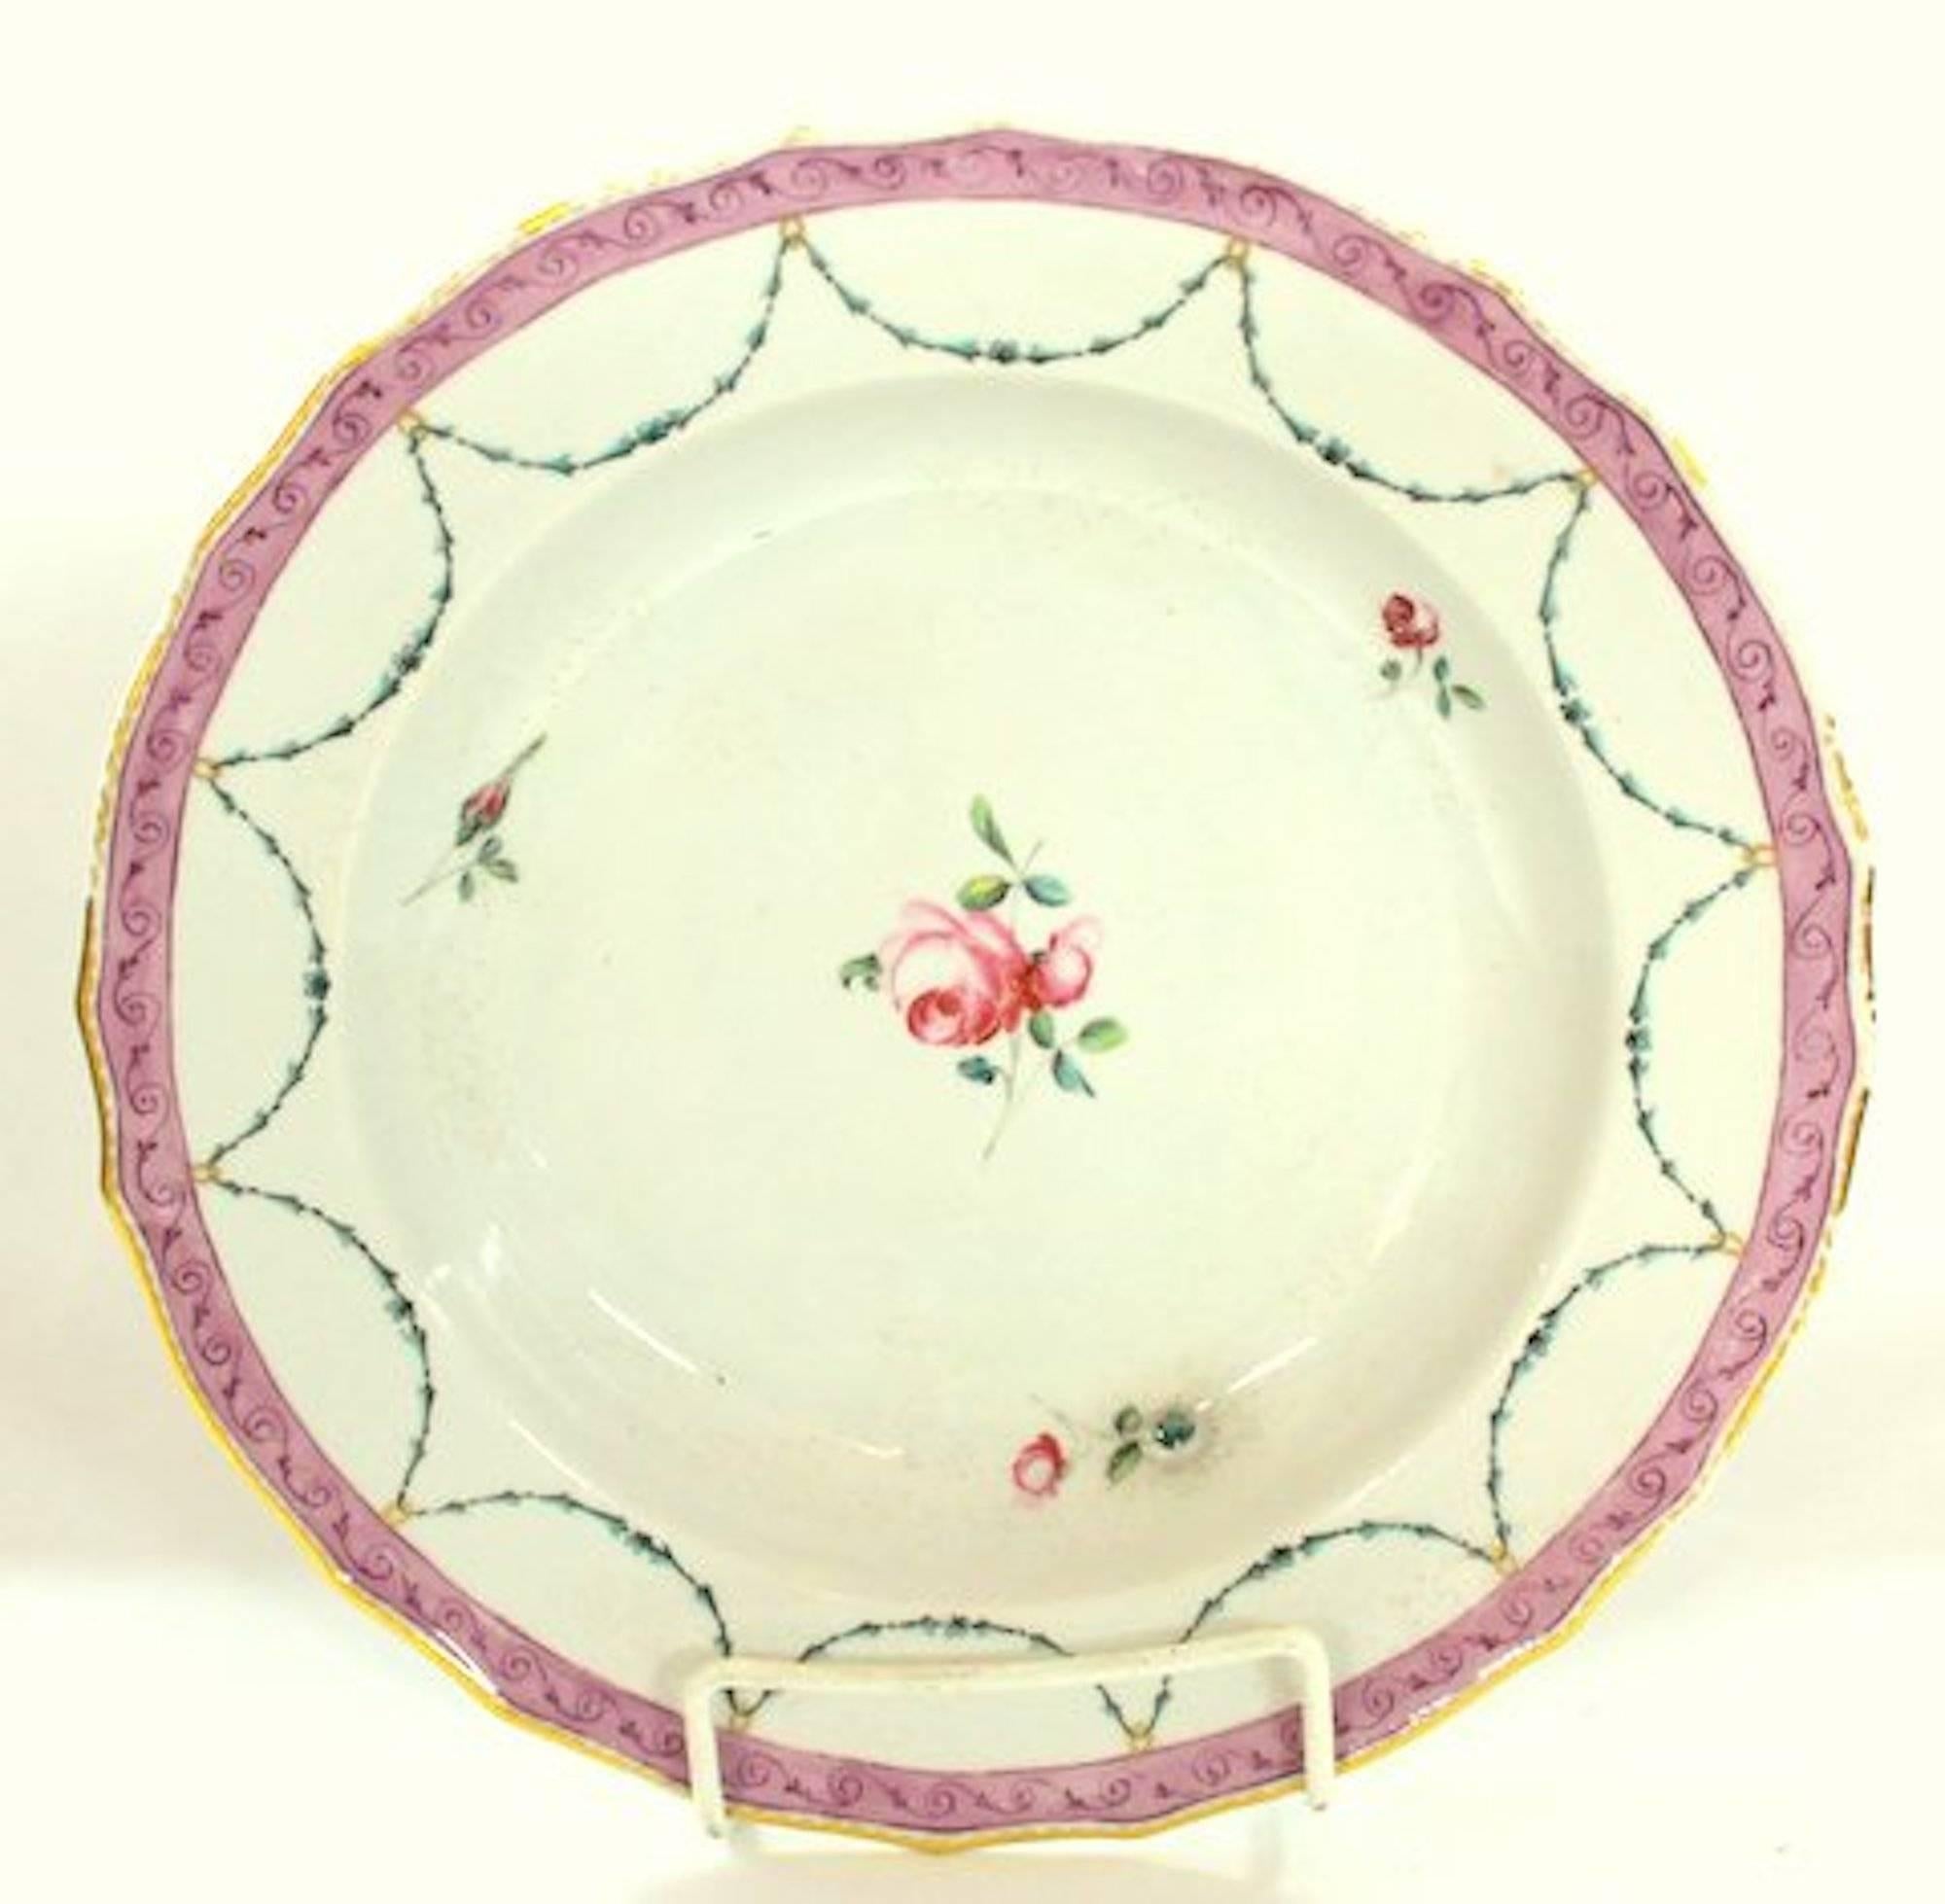 Very rare and fine pair of antique English Chelsea-Derby porcelain neoclassical garlands and roses pattern rim soup plates (Variation of Pattern No. 37 as noted by Dr. Derek Thomas of the Derby Porcelain International Society). Painted in the manner